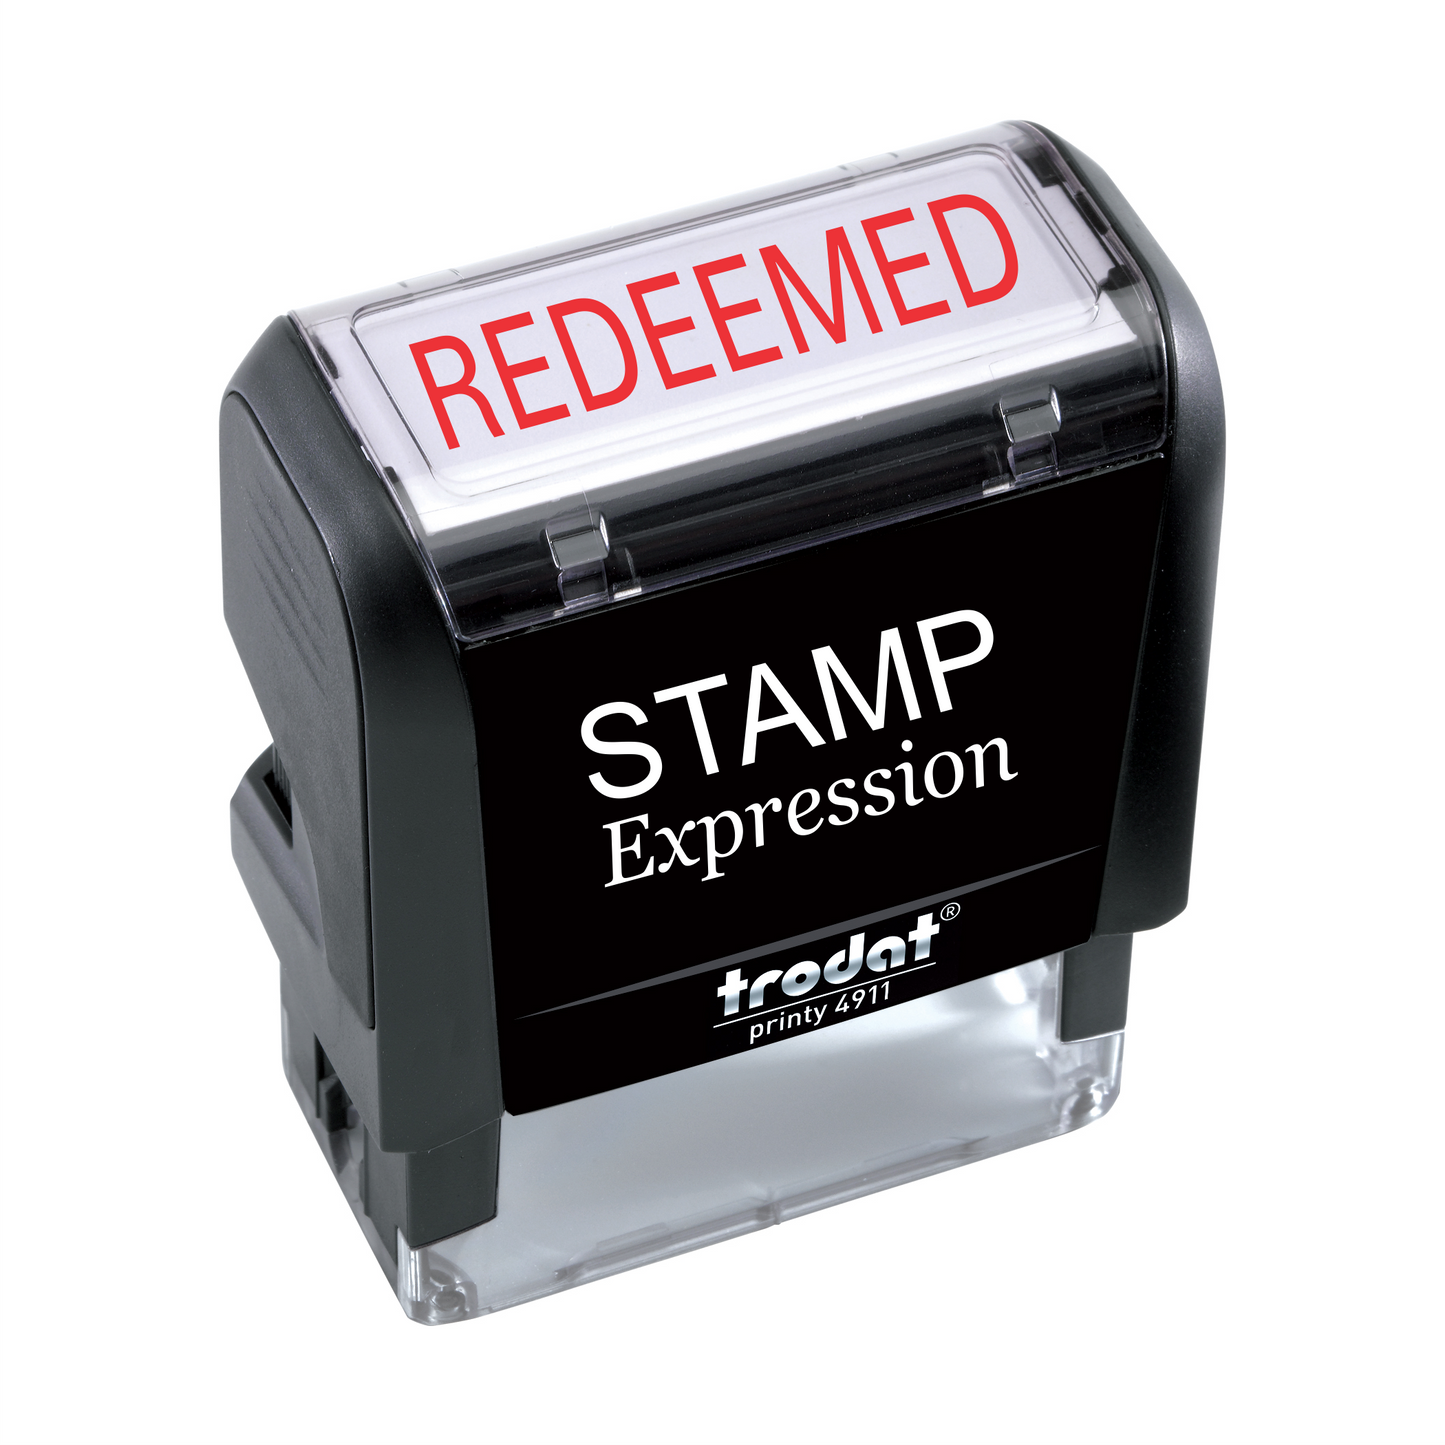 Redeemed Office Self Inking Rubber Stamp (SH-5053)